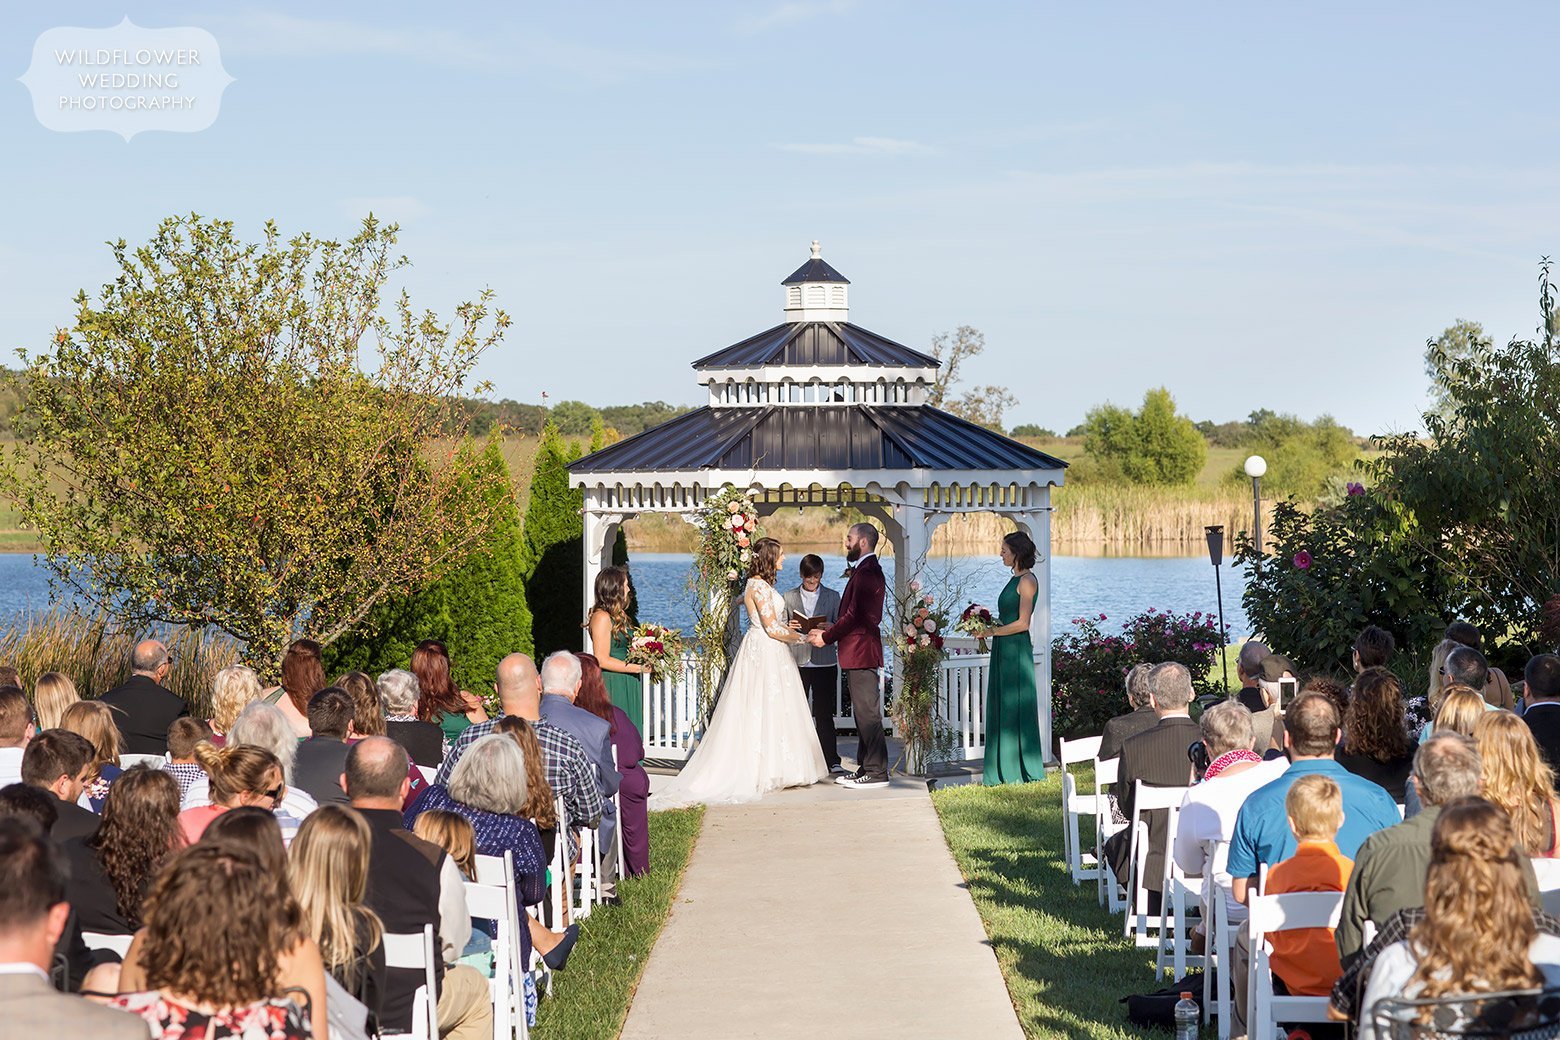 Bride and groom are married under gazebo at Serenity Valley Winery.